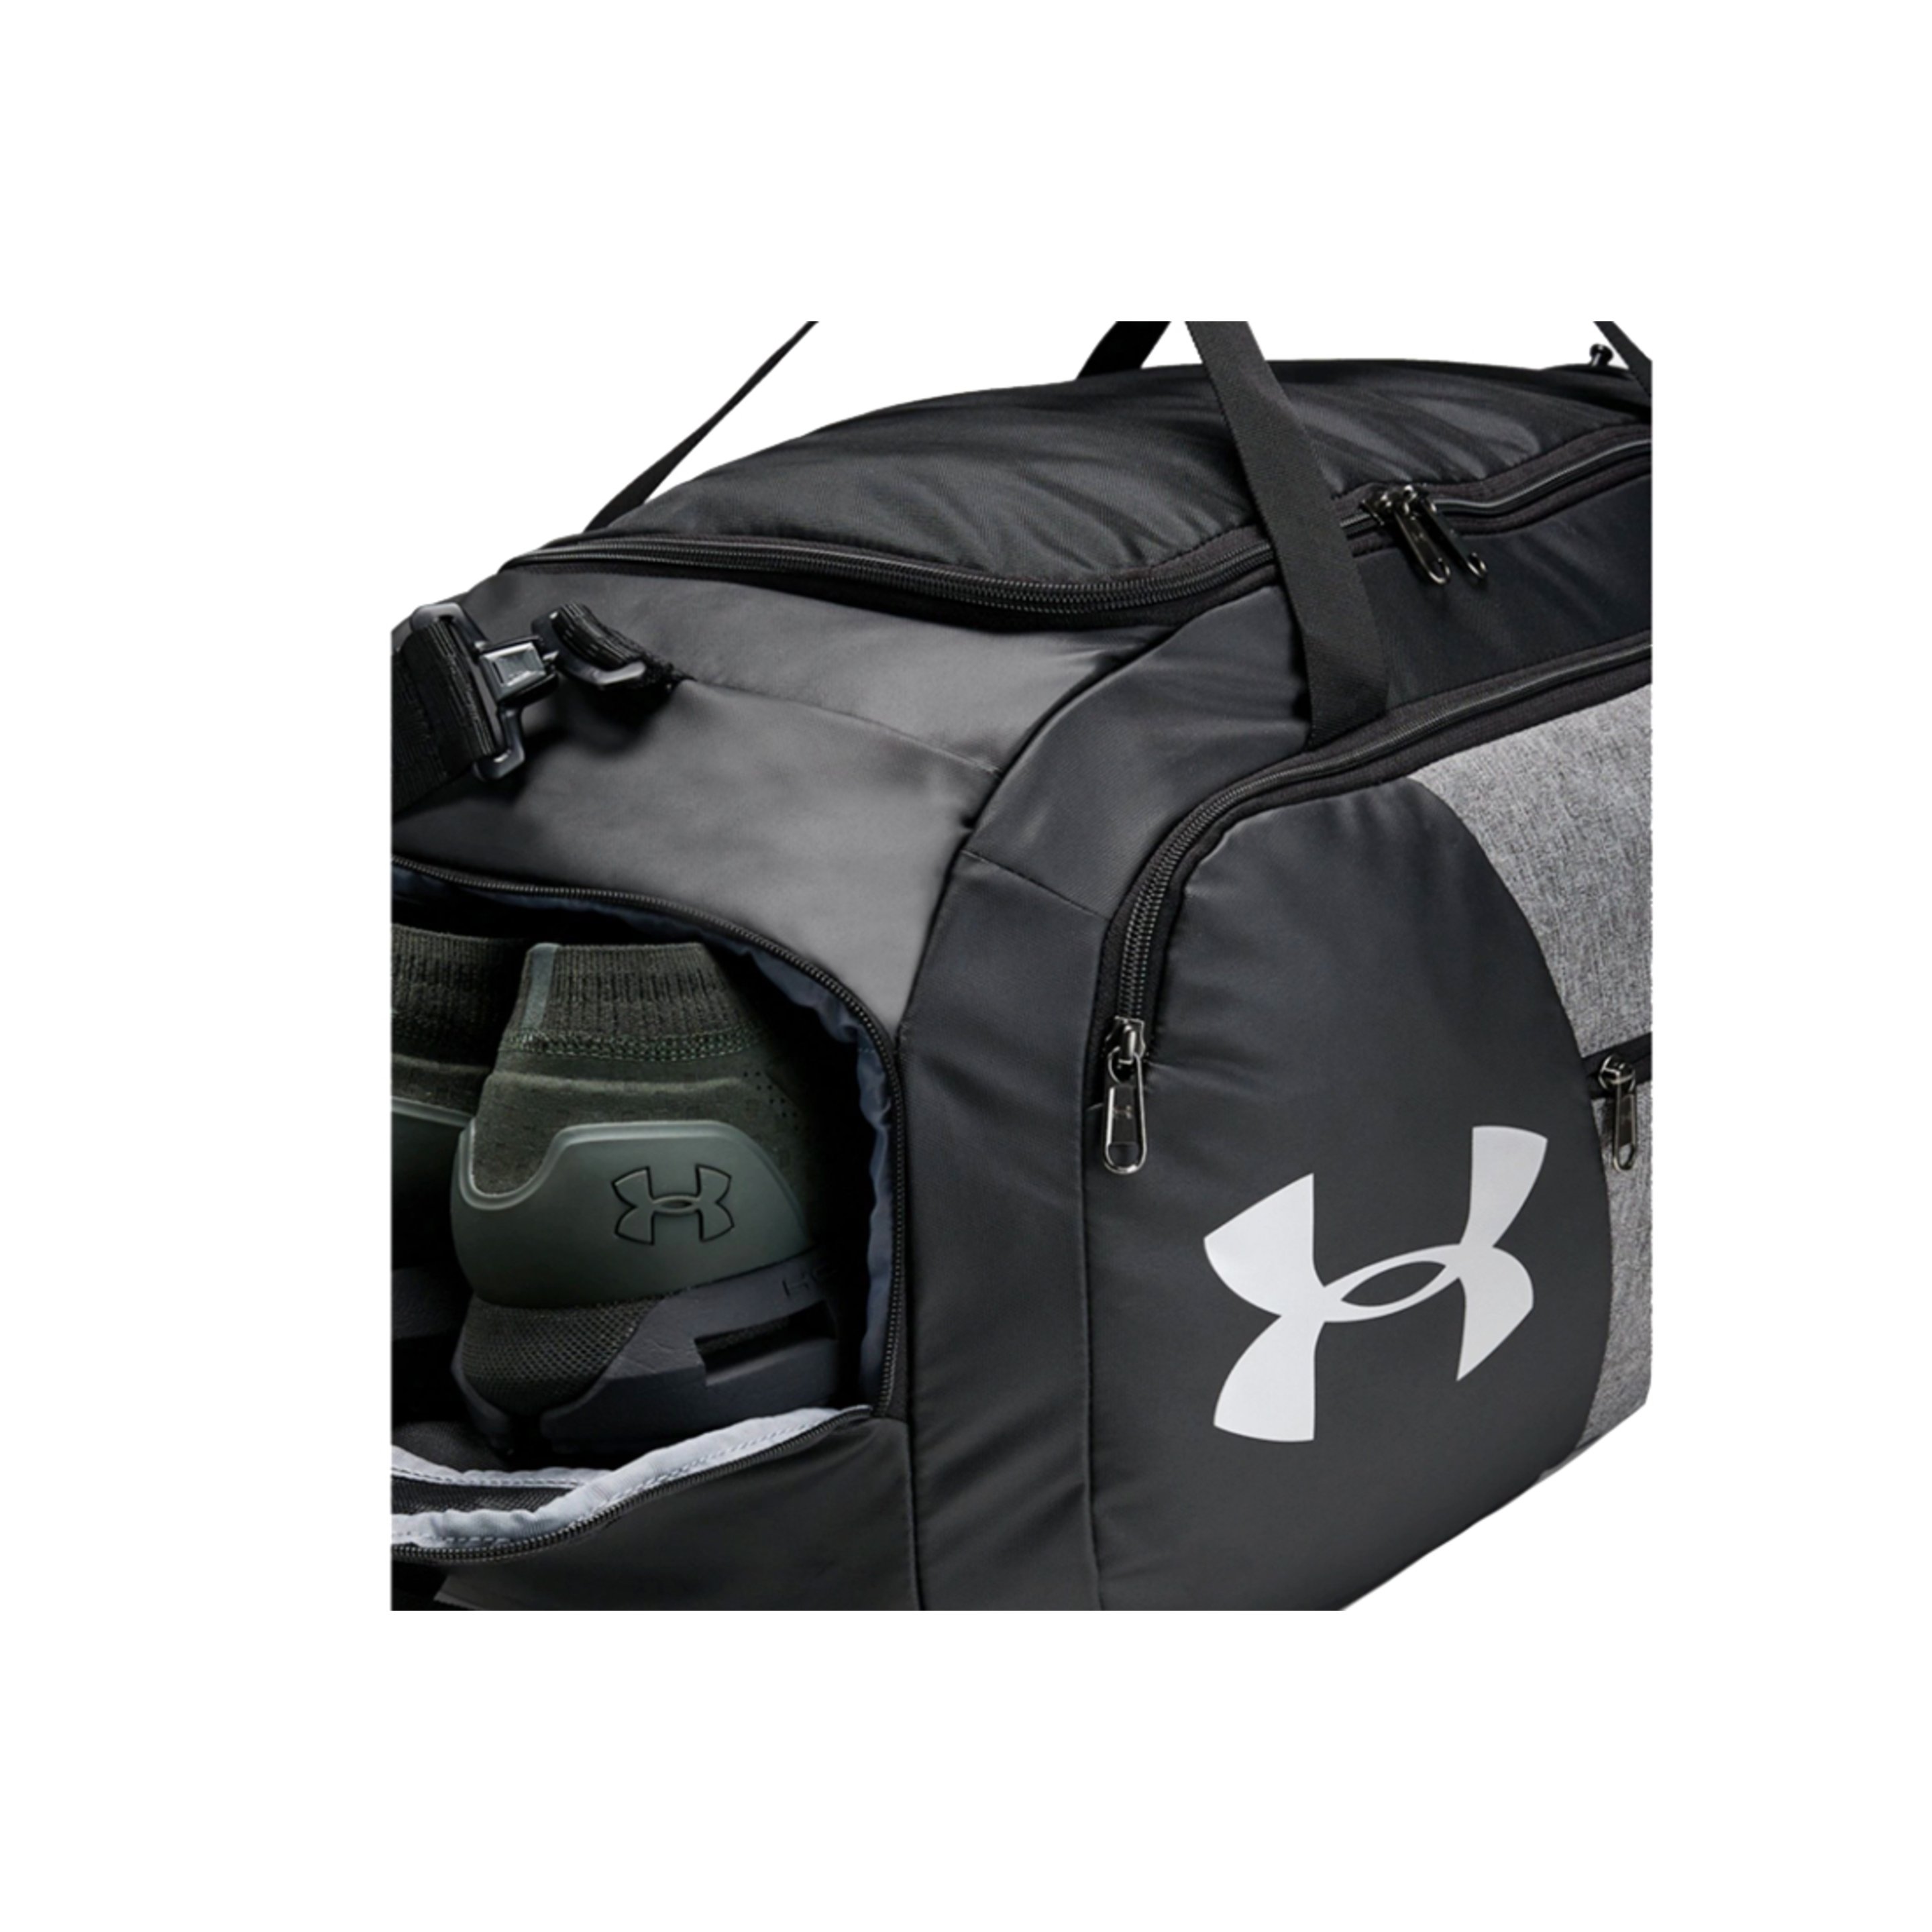 Under Armour Undeniable Duffel 4.0 Md 1342657-040